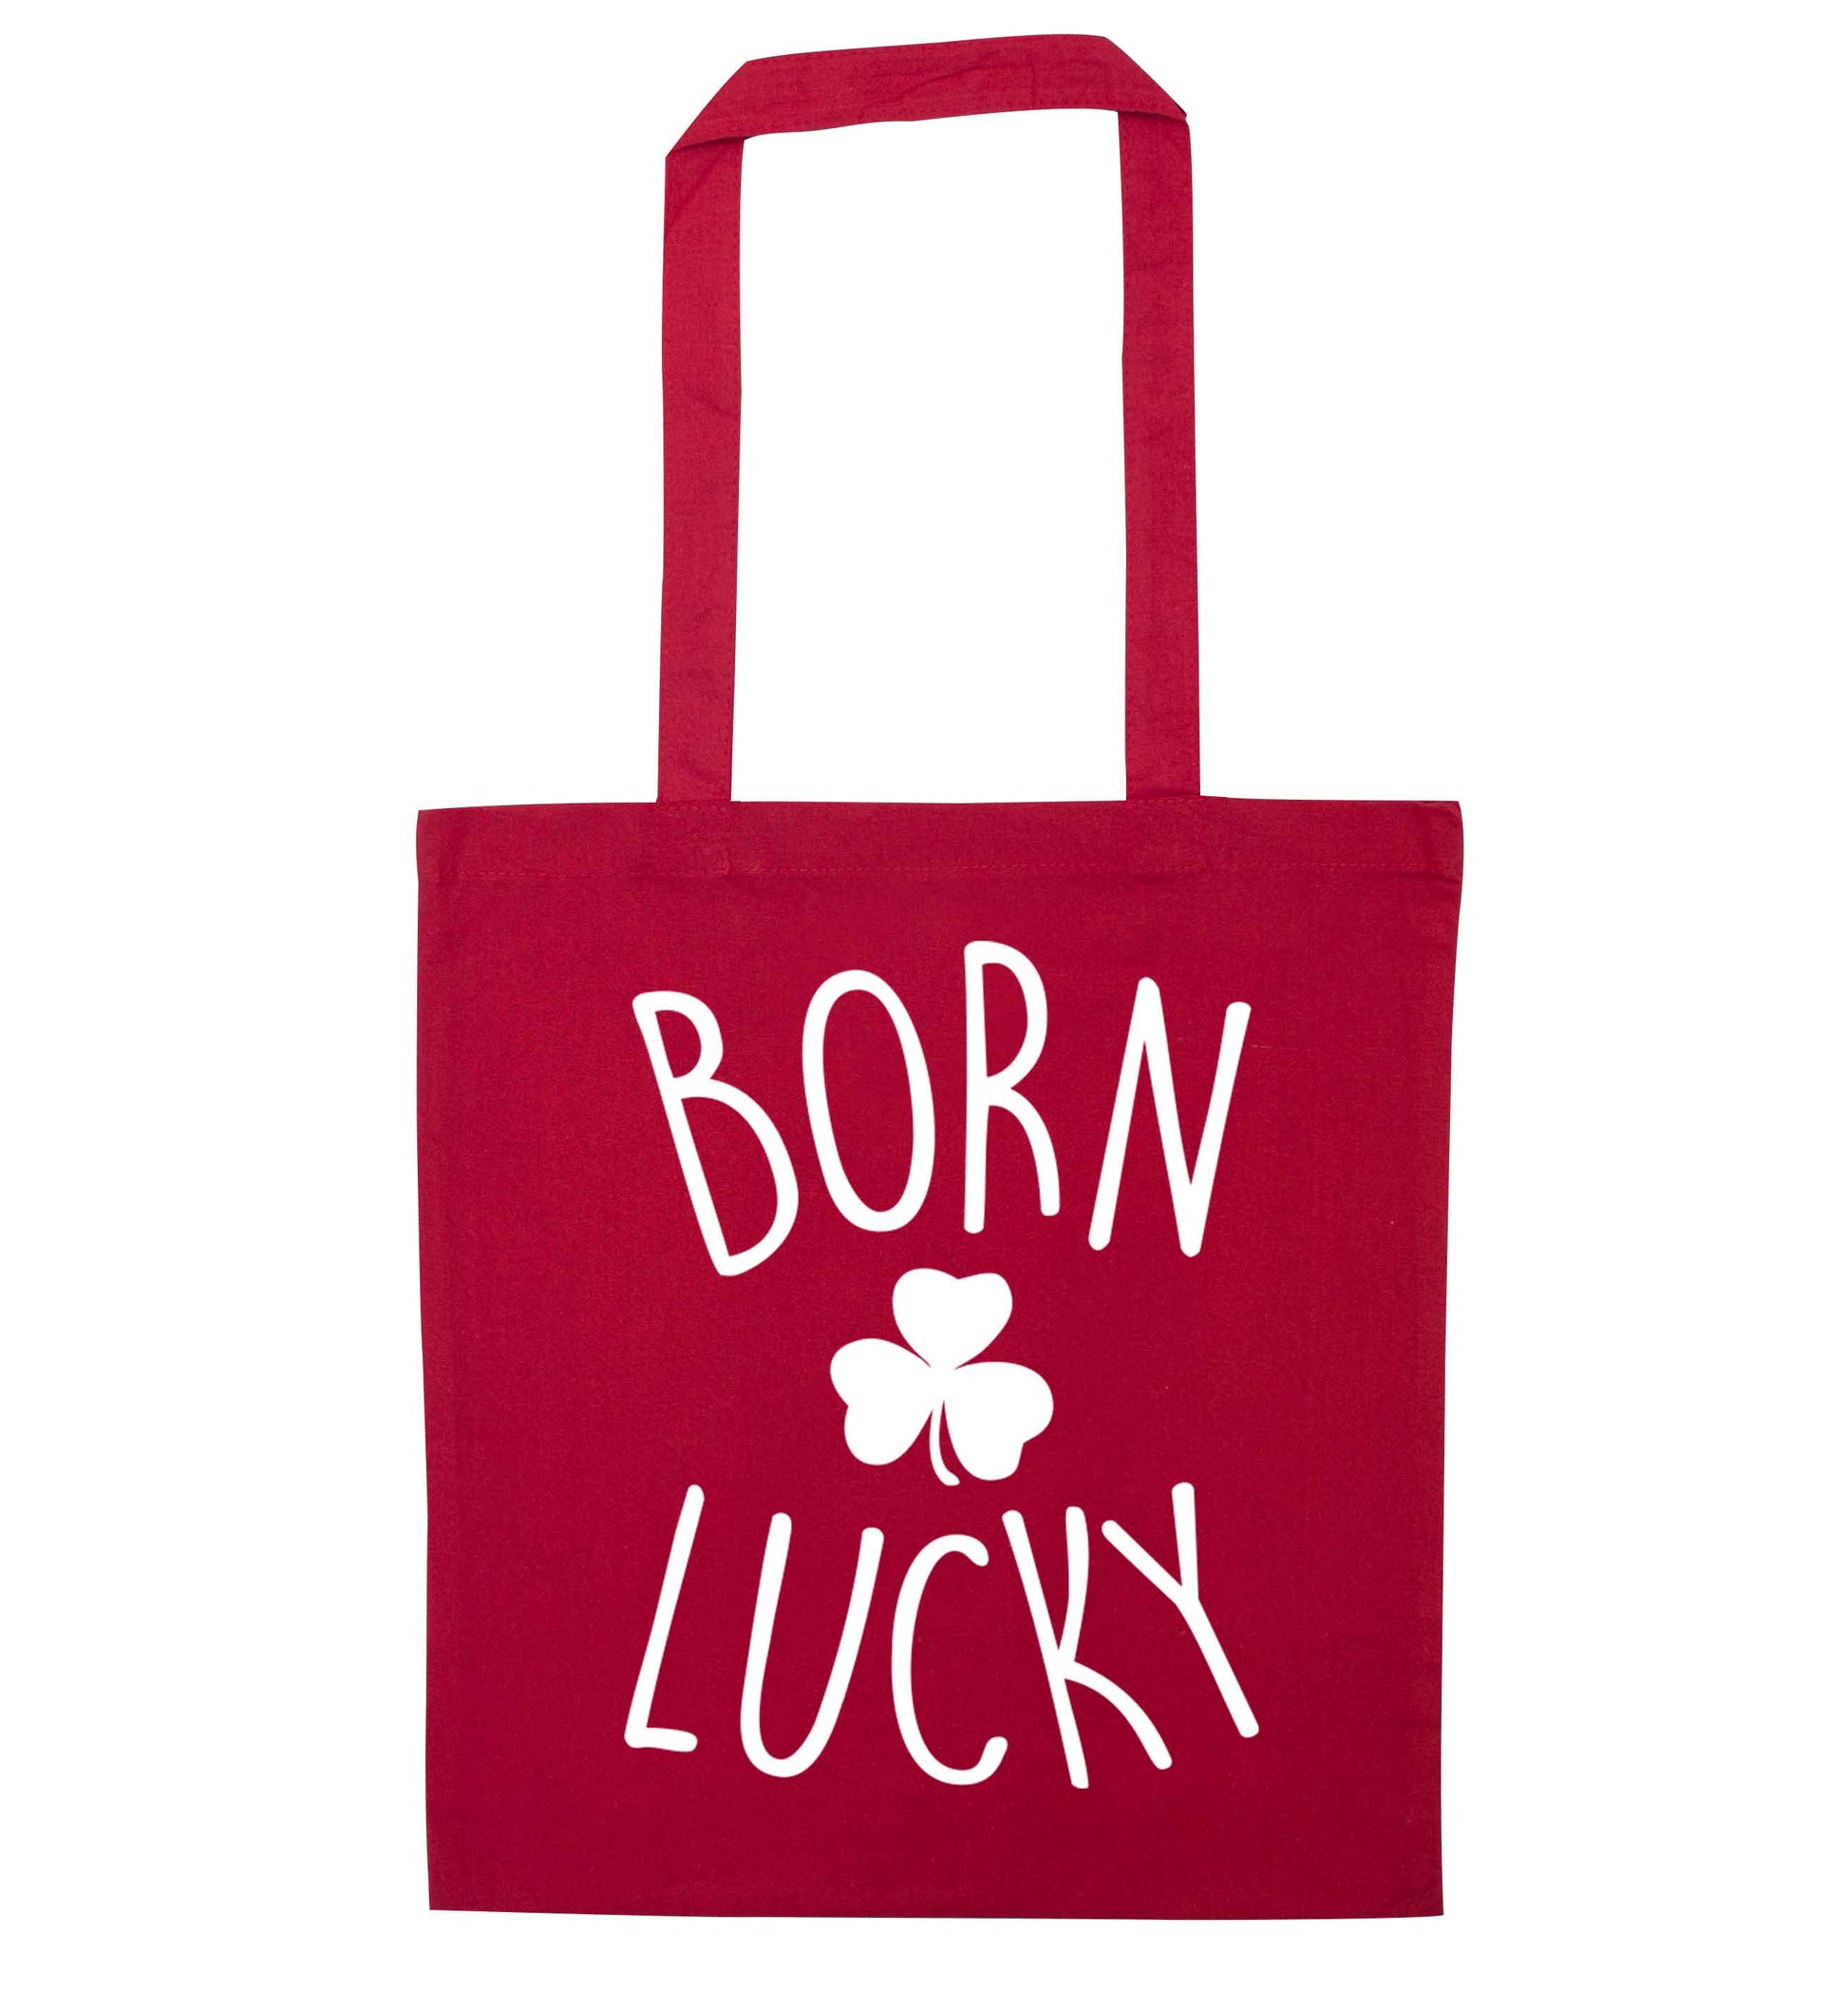  Born Lucky red tote bag